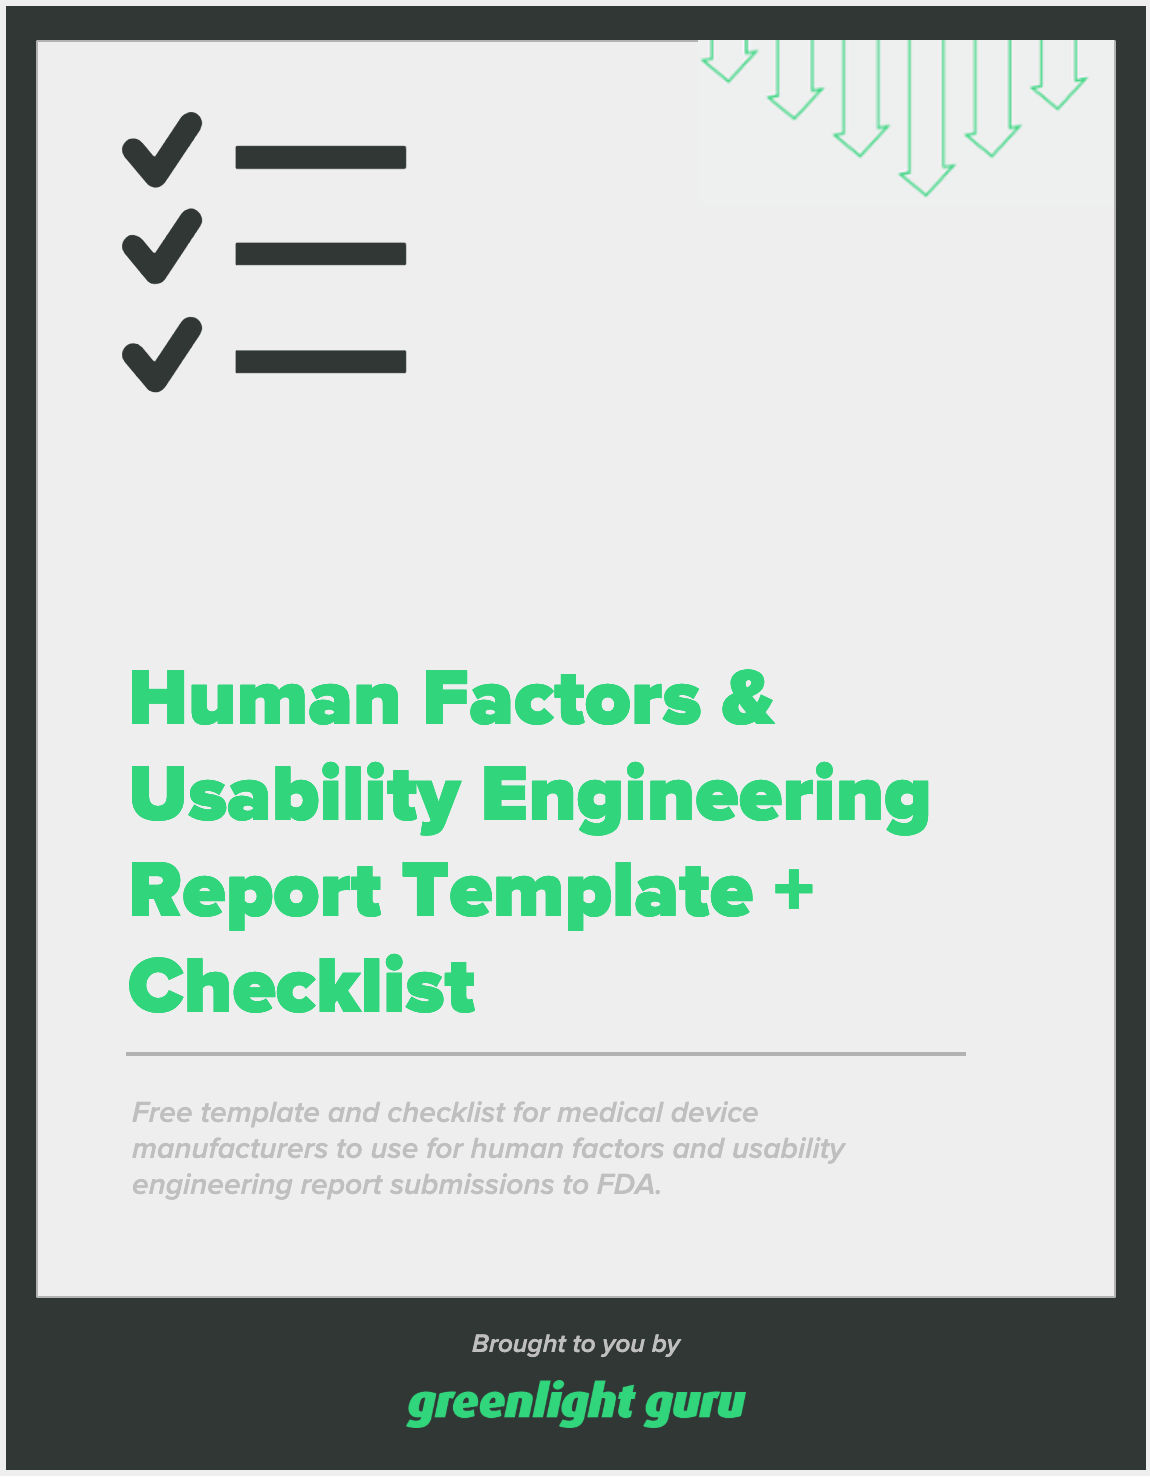 Human Factors & Usability Engineering Report Template + Checklist - slide-in cover-1